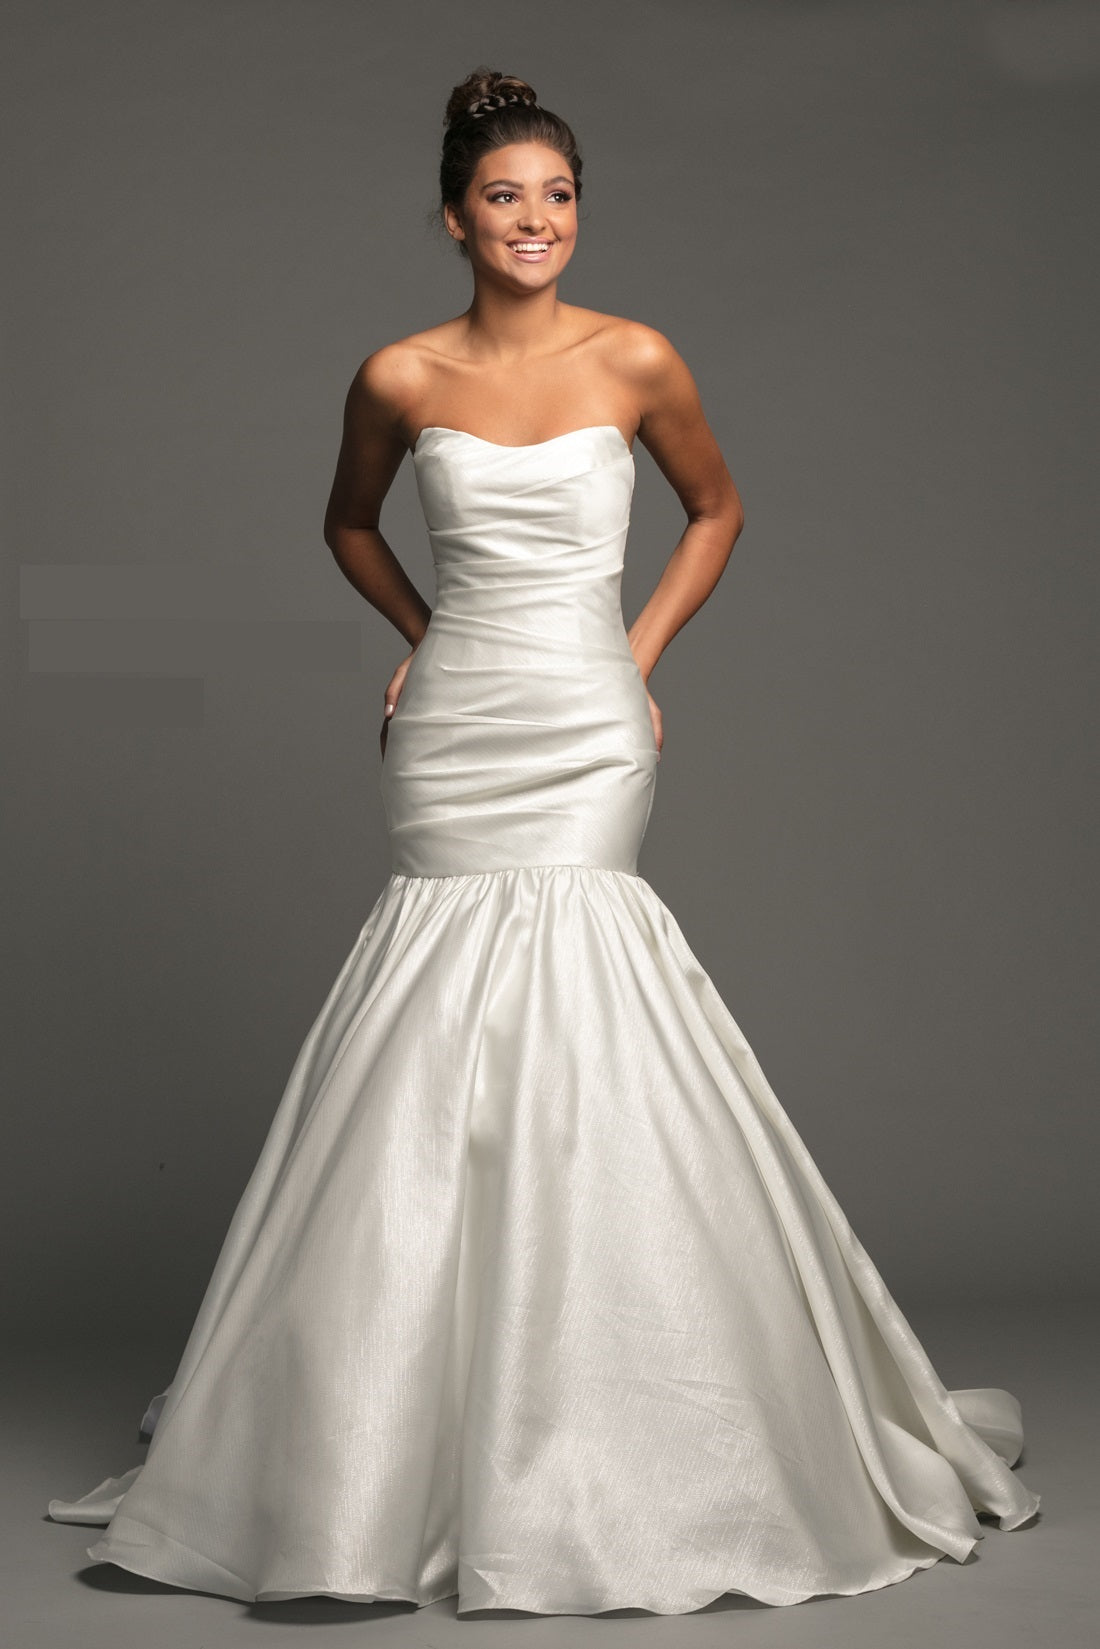 Johnathan Kayne B118 is a stunning Long Mermaid Wedding Dress in Diamond White. This long shimmering Pleated gown features a gathered bodice for a flattering silhouette. Fit & Flare With a stunningly lush Trumpet skirt with a sweeping train. Material features a shimmering Glow. Great Plus Size Formal Gown.  Available Color: Diamond White  Available Size: 20